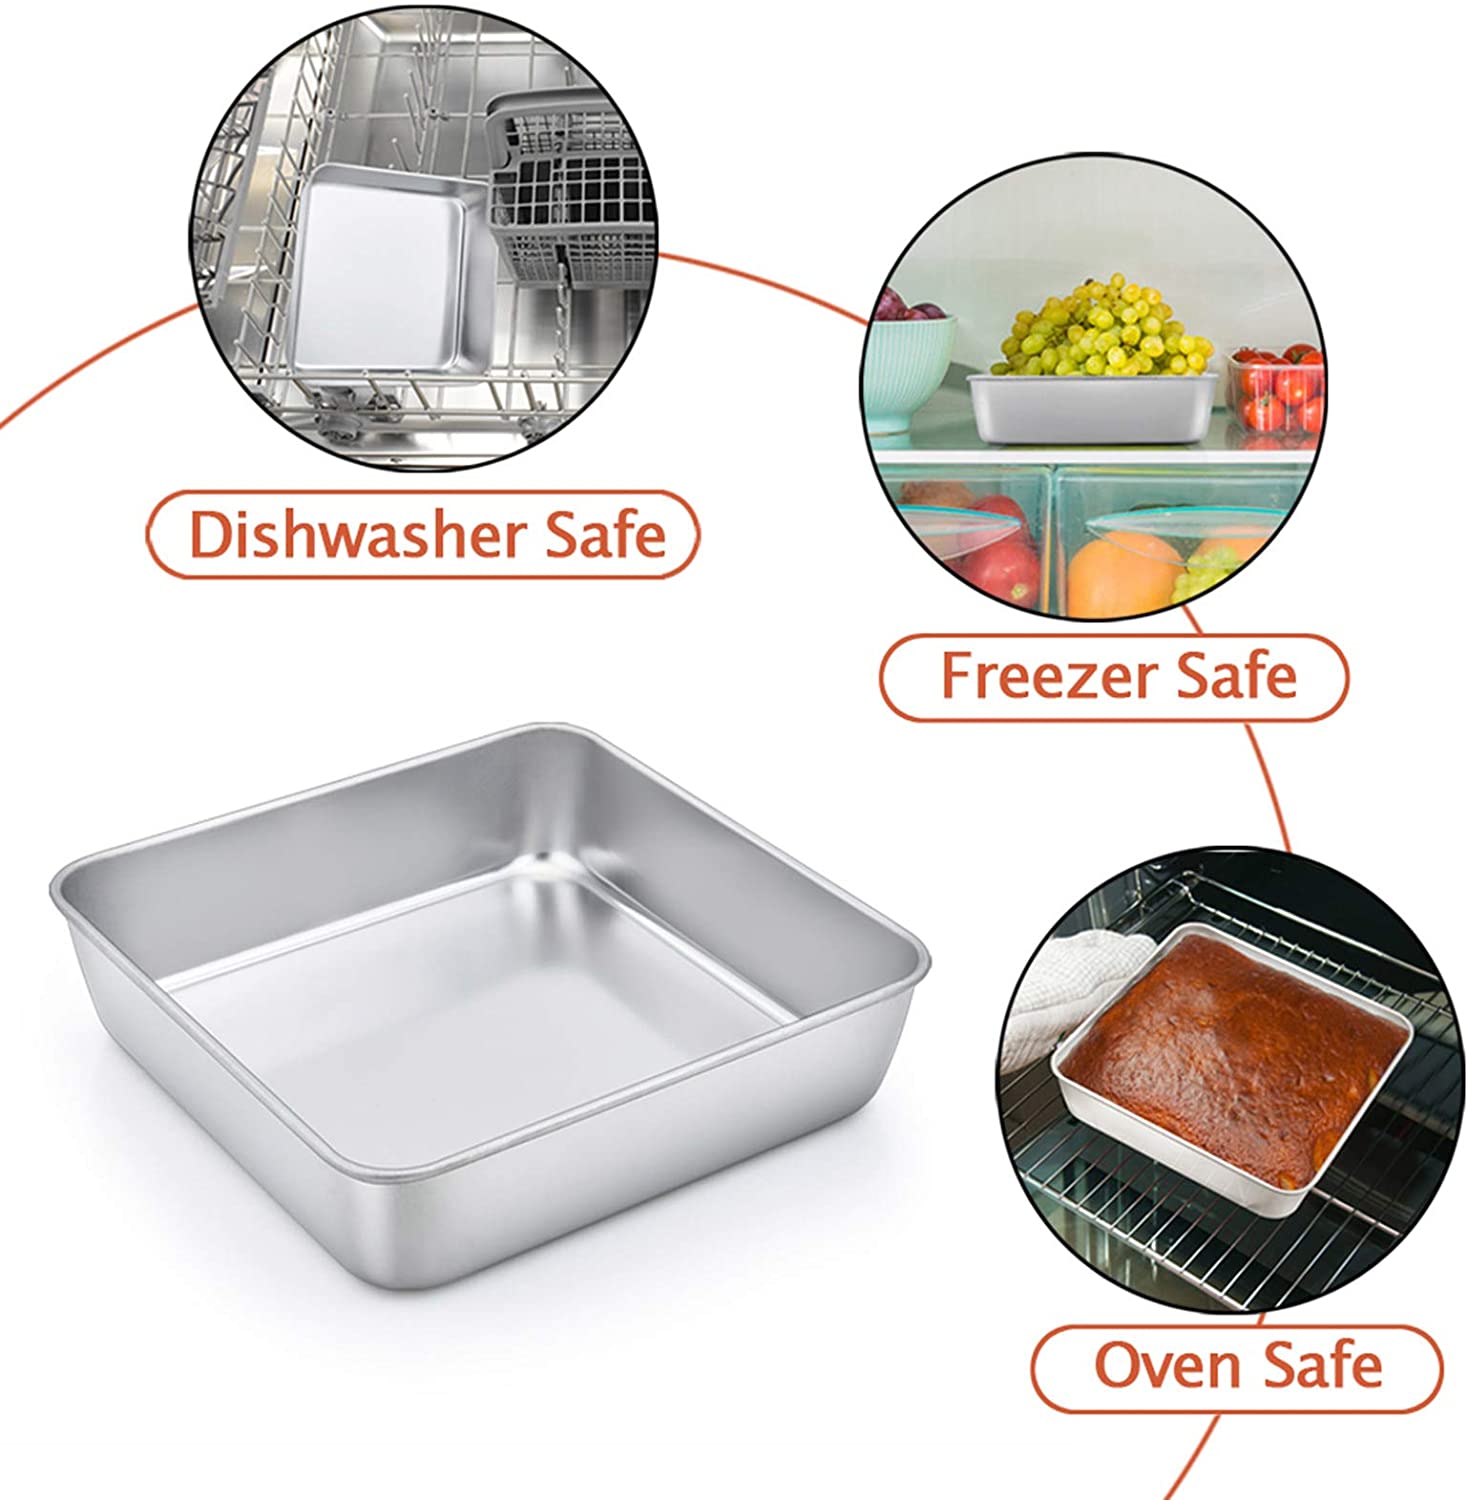 Anything But Square: 8x8 Pans You'll Love